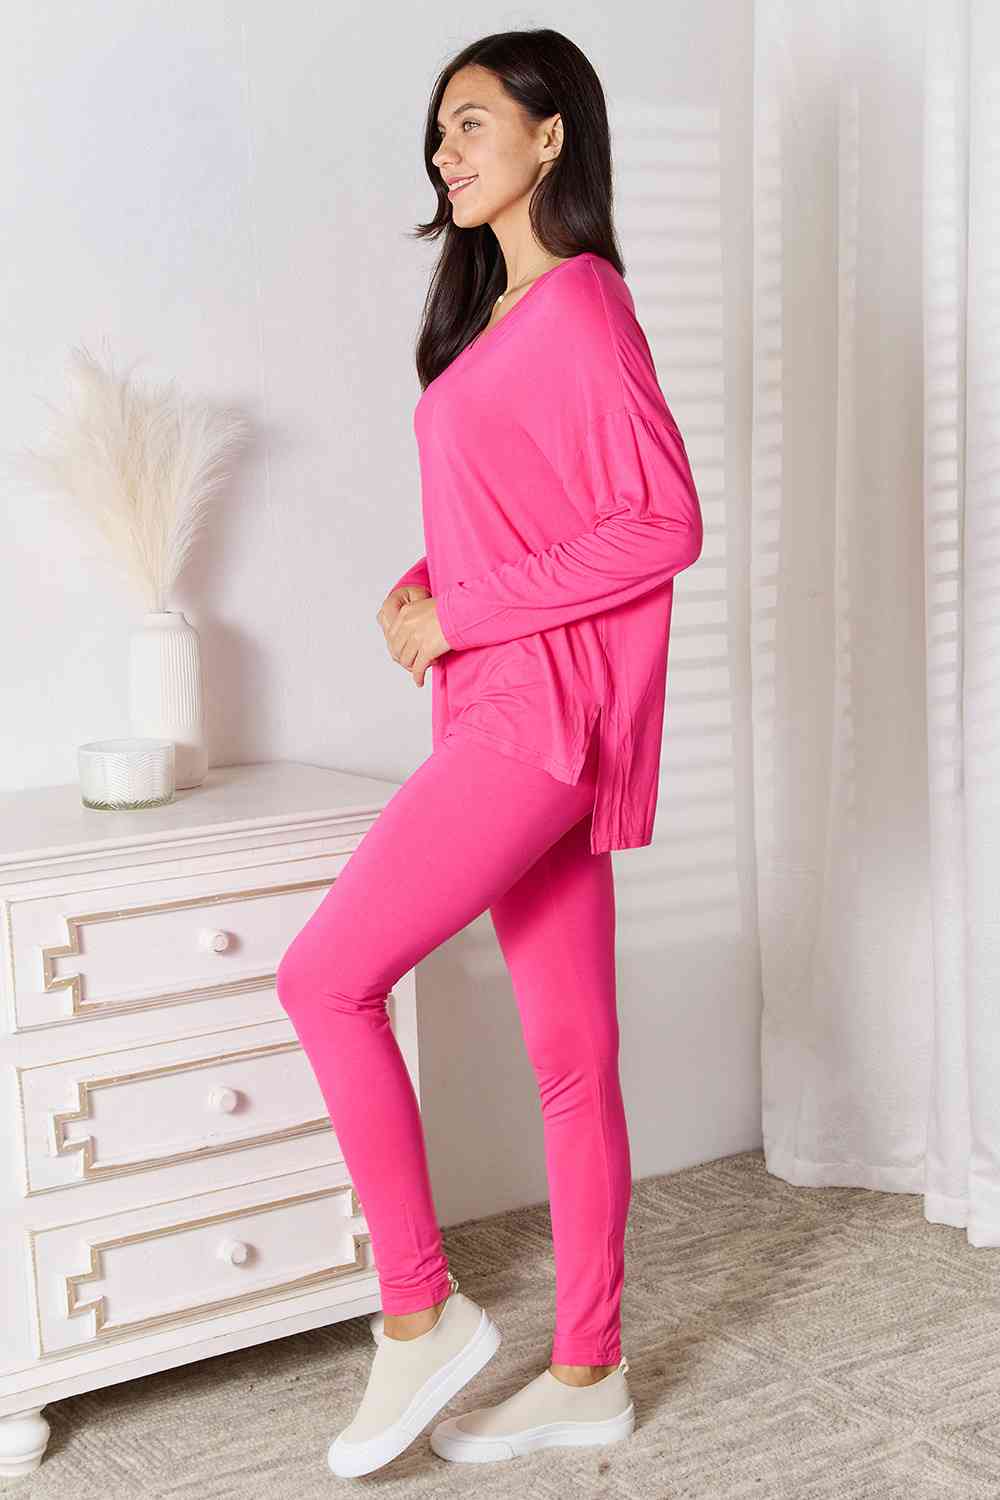 V-Neck Soft Rayon Long Sleeve Top and Pants Lounge Set - Bottoms - Outfit Sets - 4 - 2024